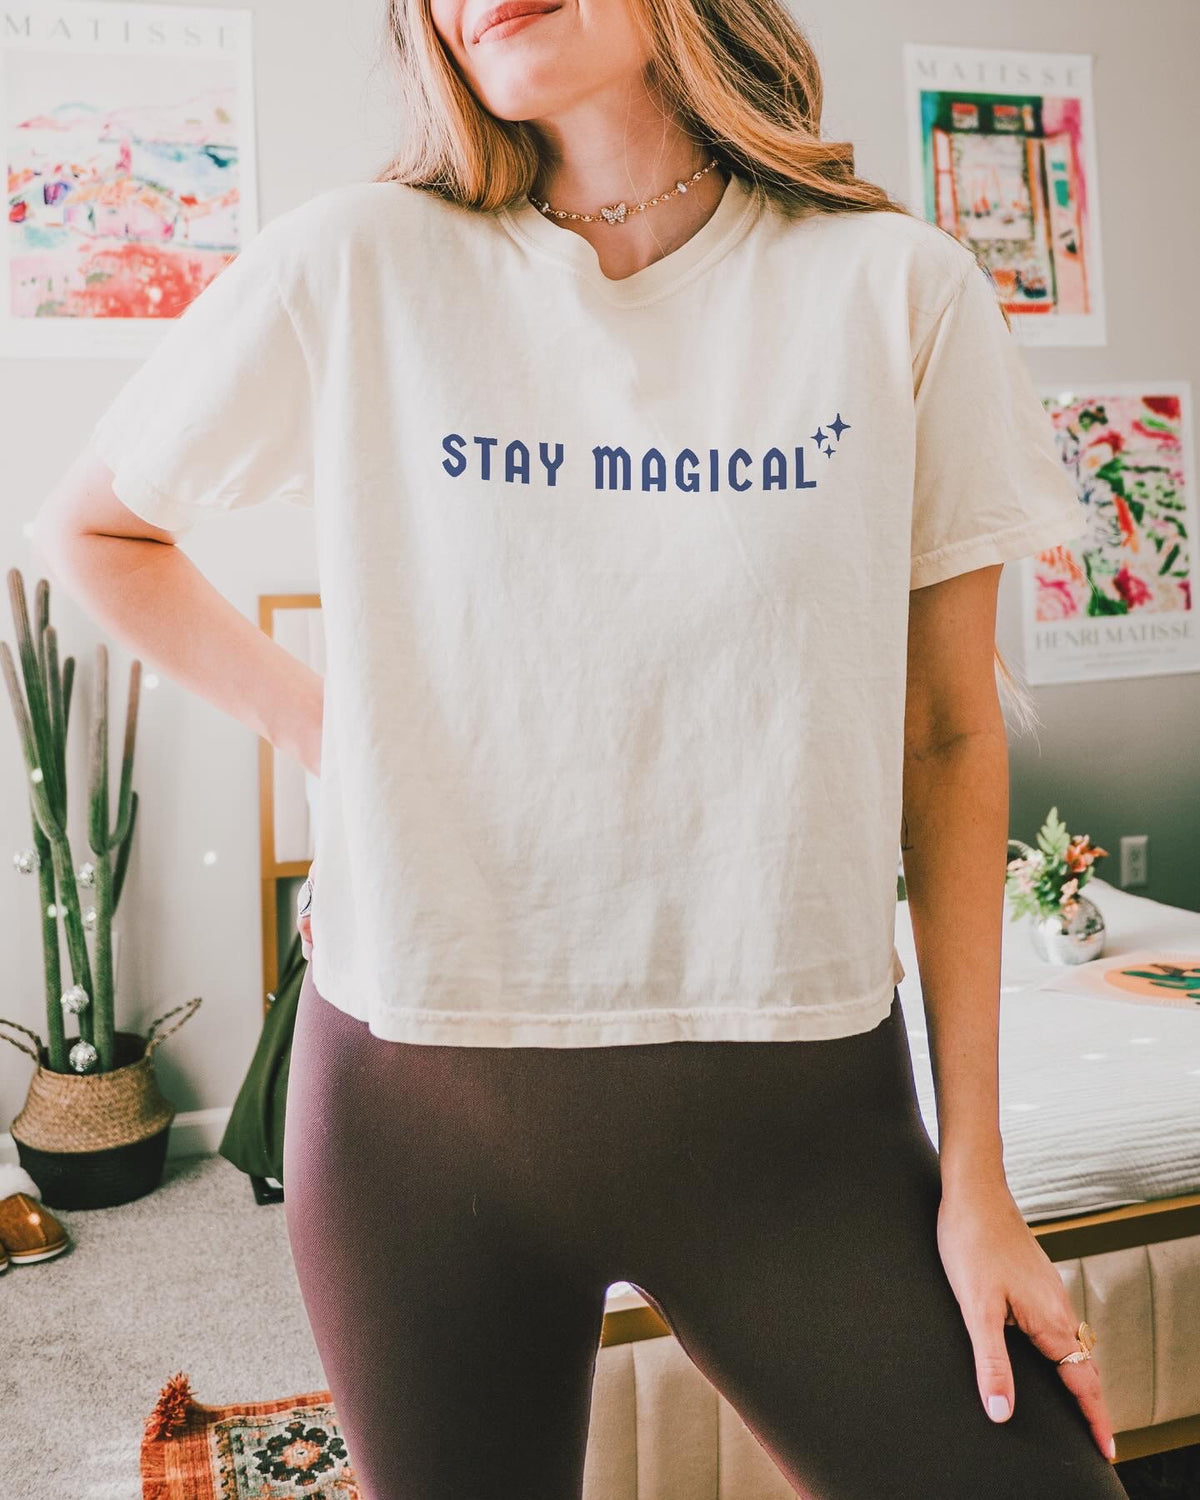 Stay Magical Comfort Colors Women's Boxy Tee